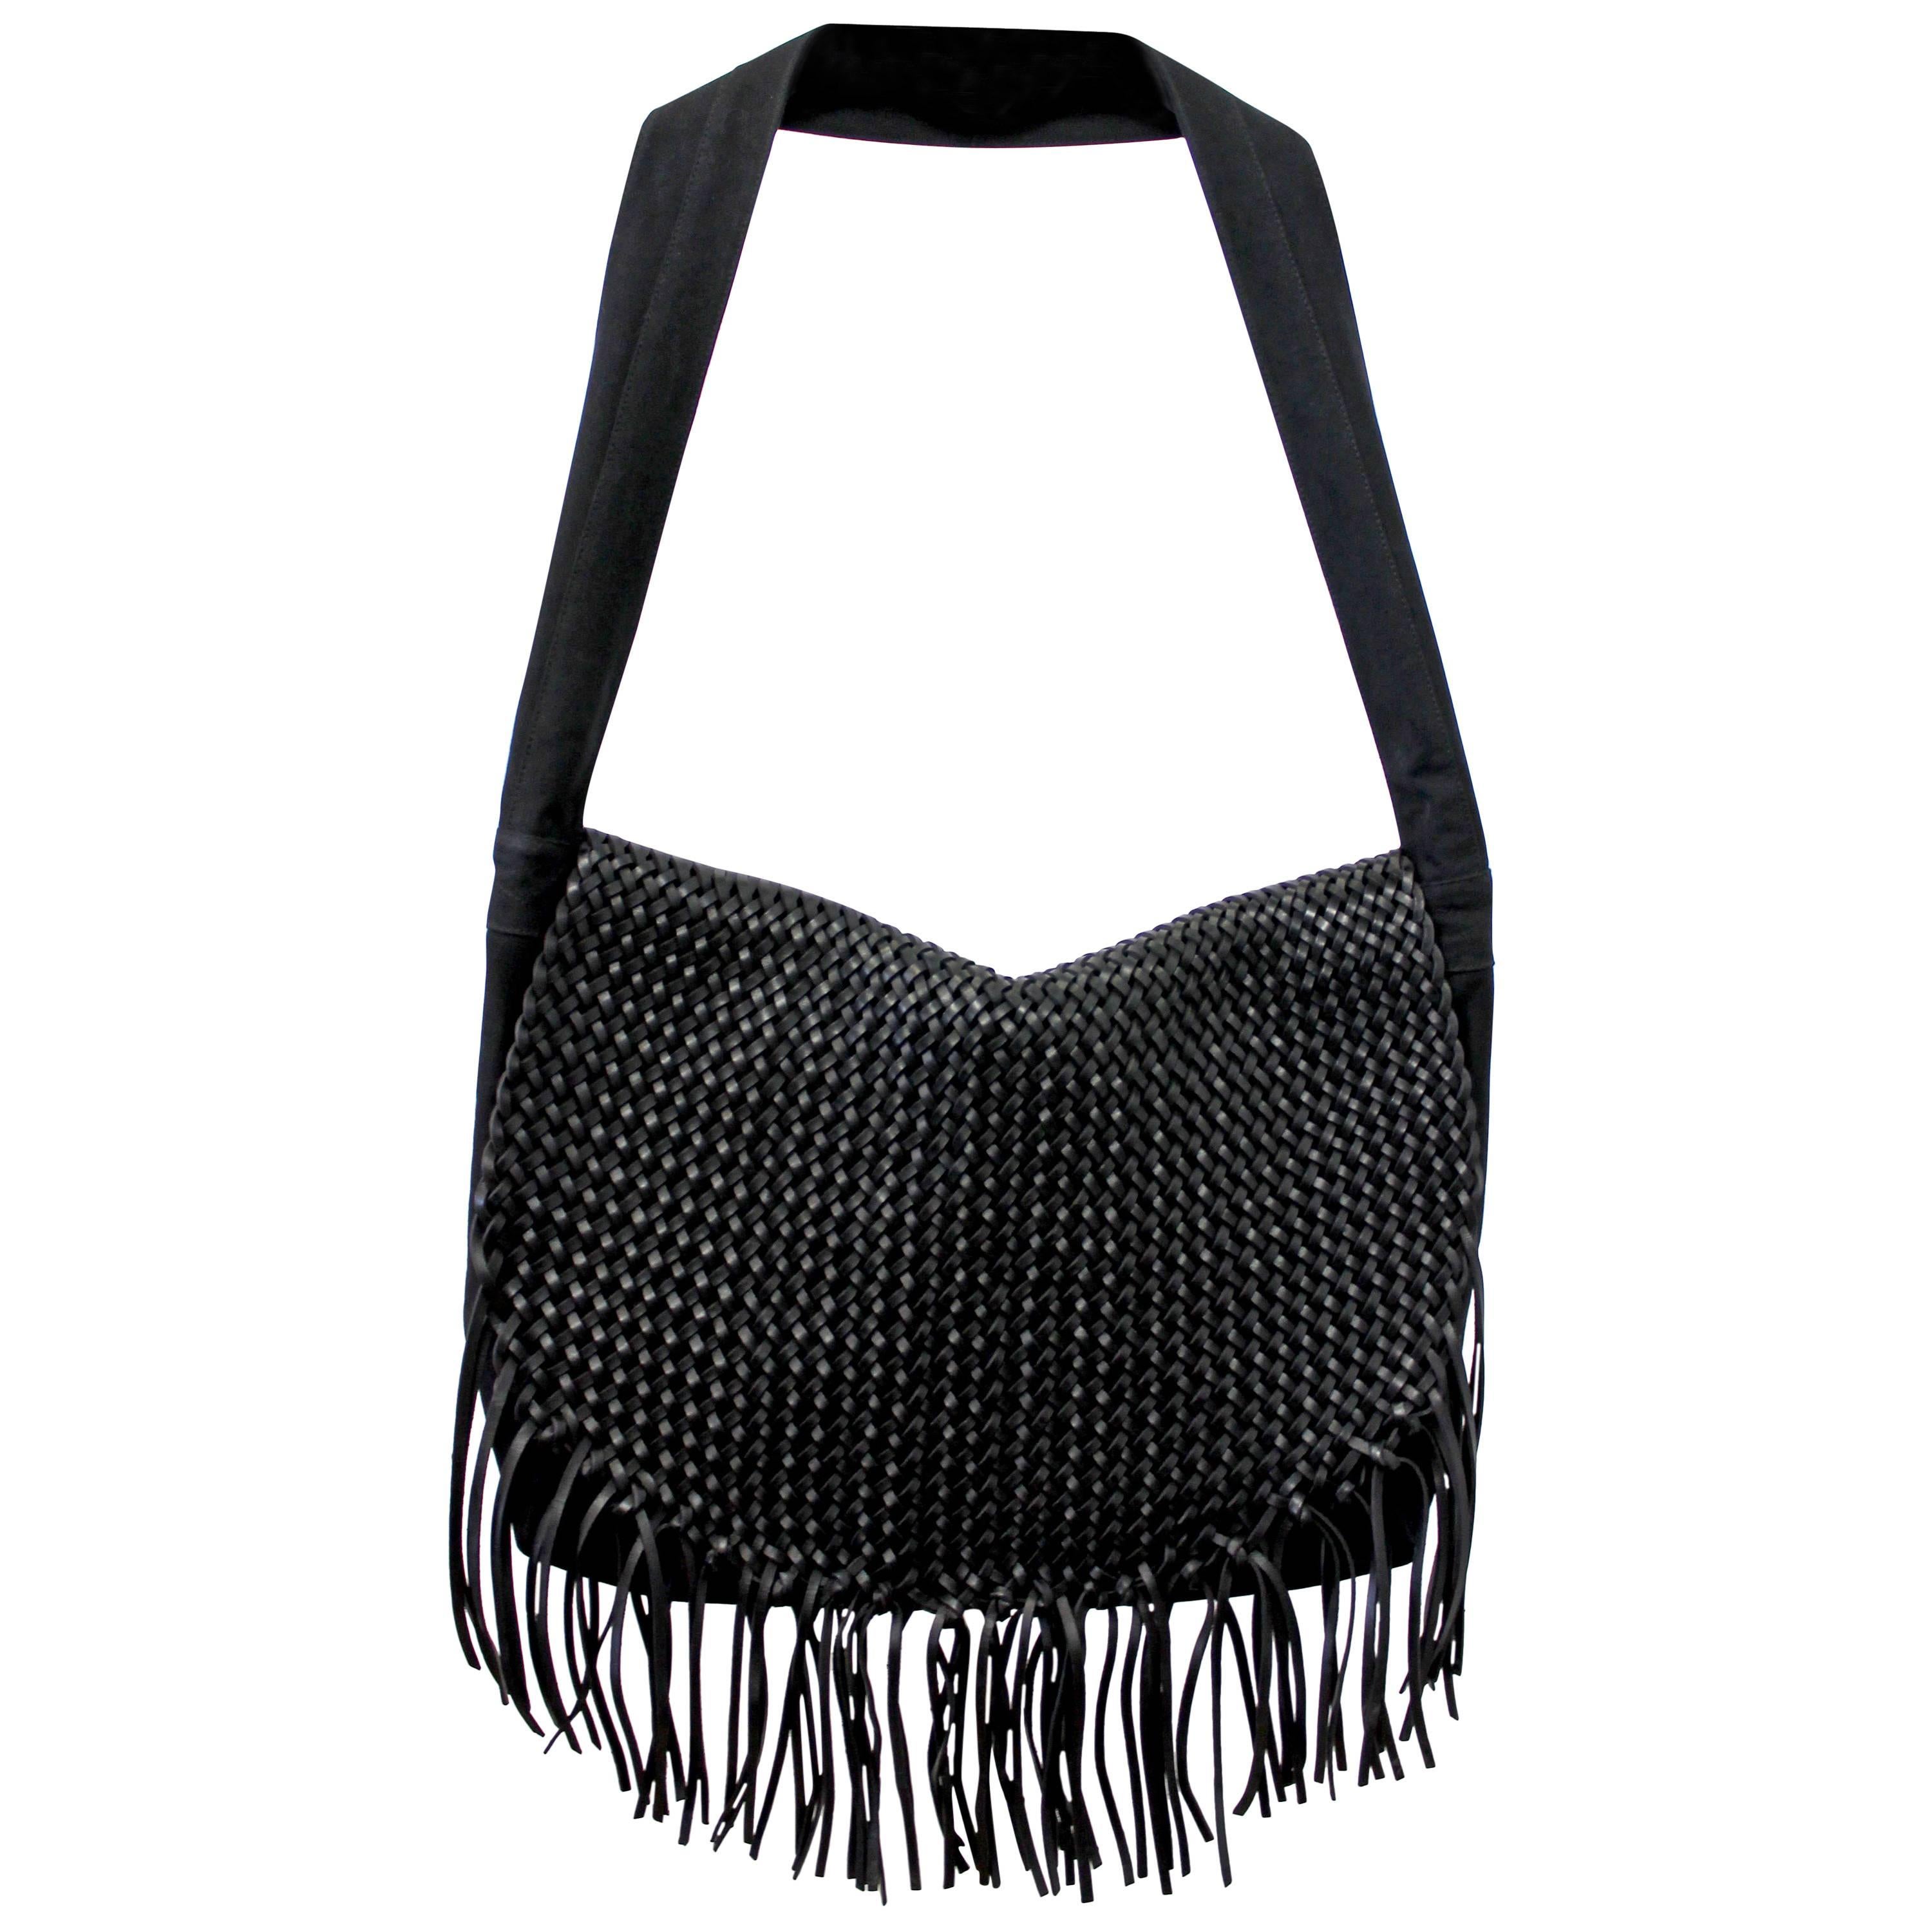 Dries Van Noten Large Woven Leather and Canvas Fringe Bag